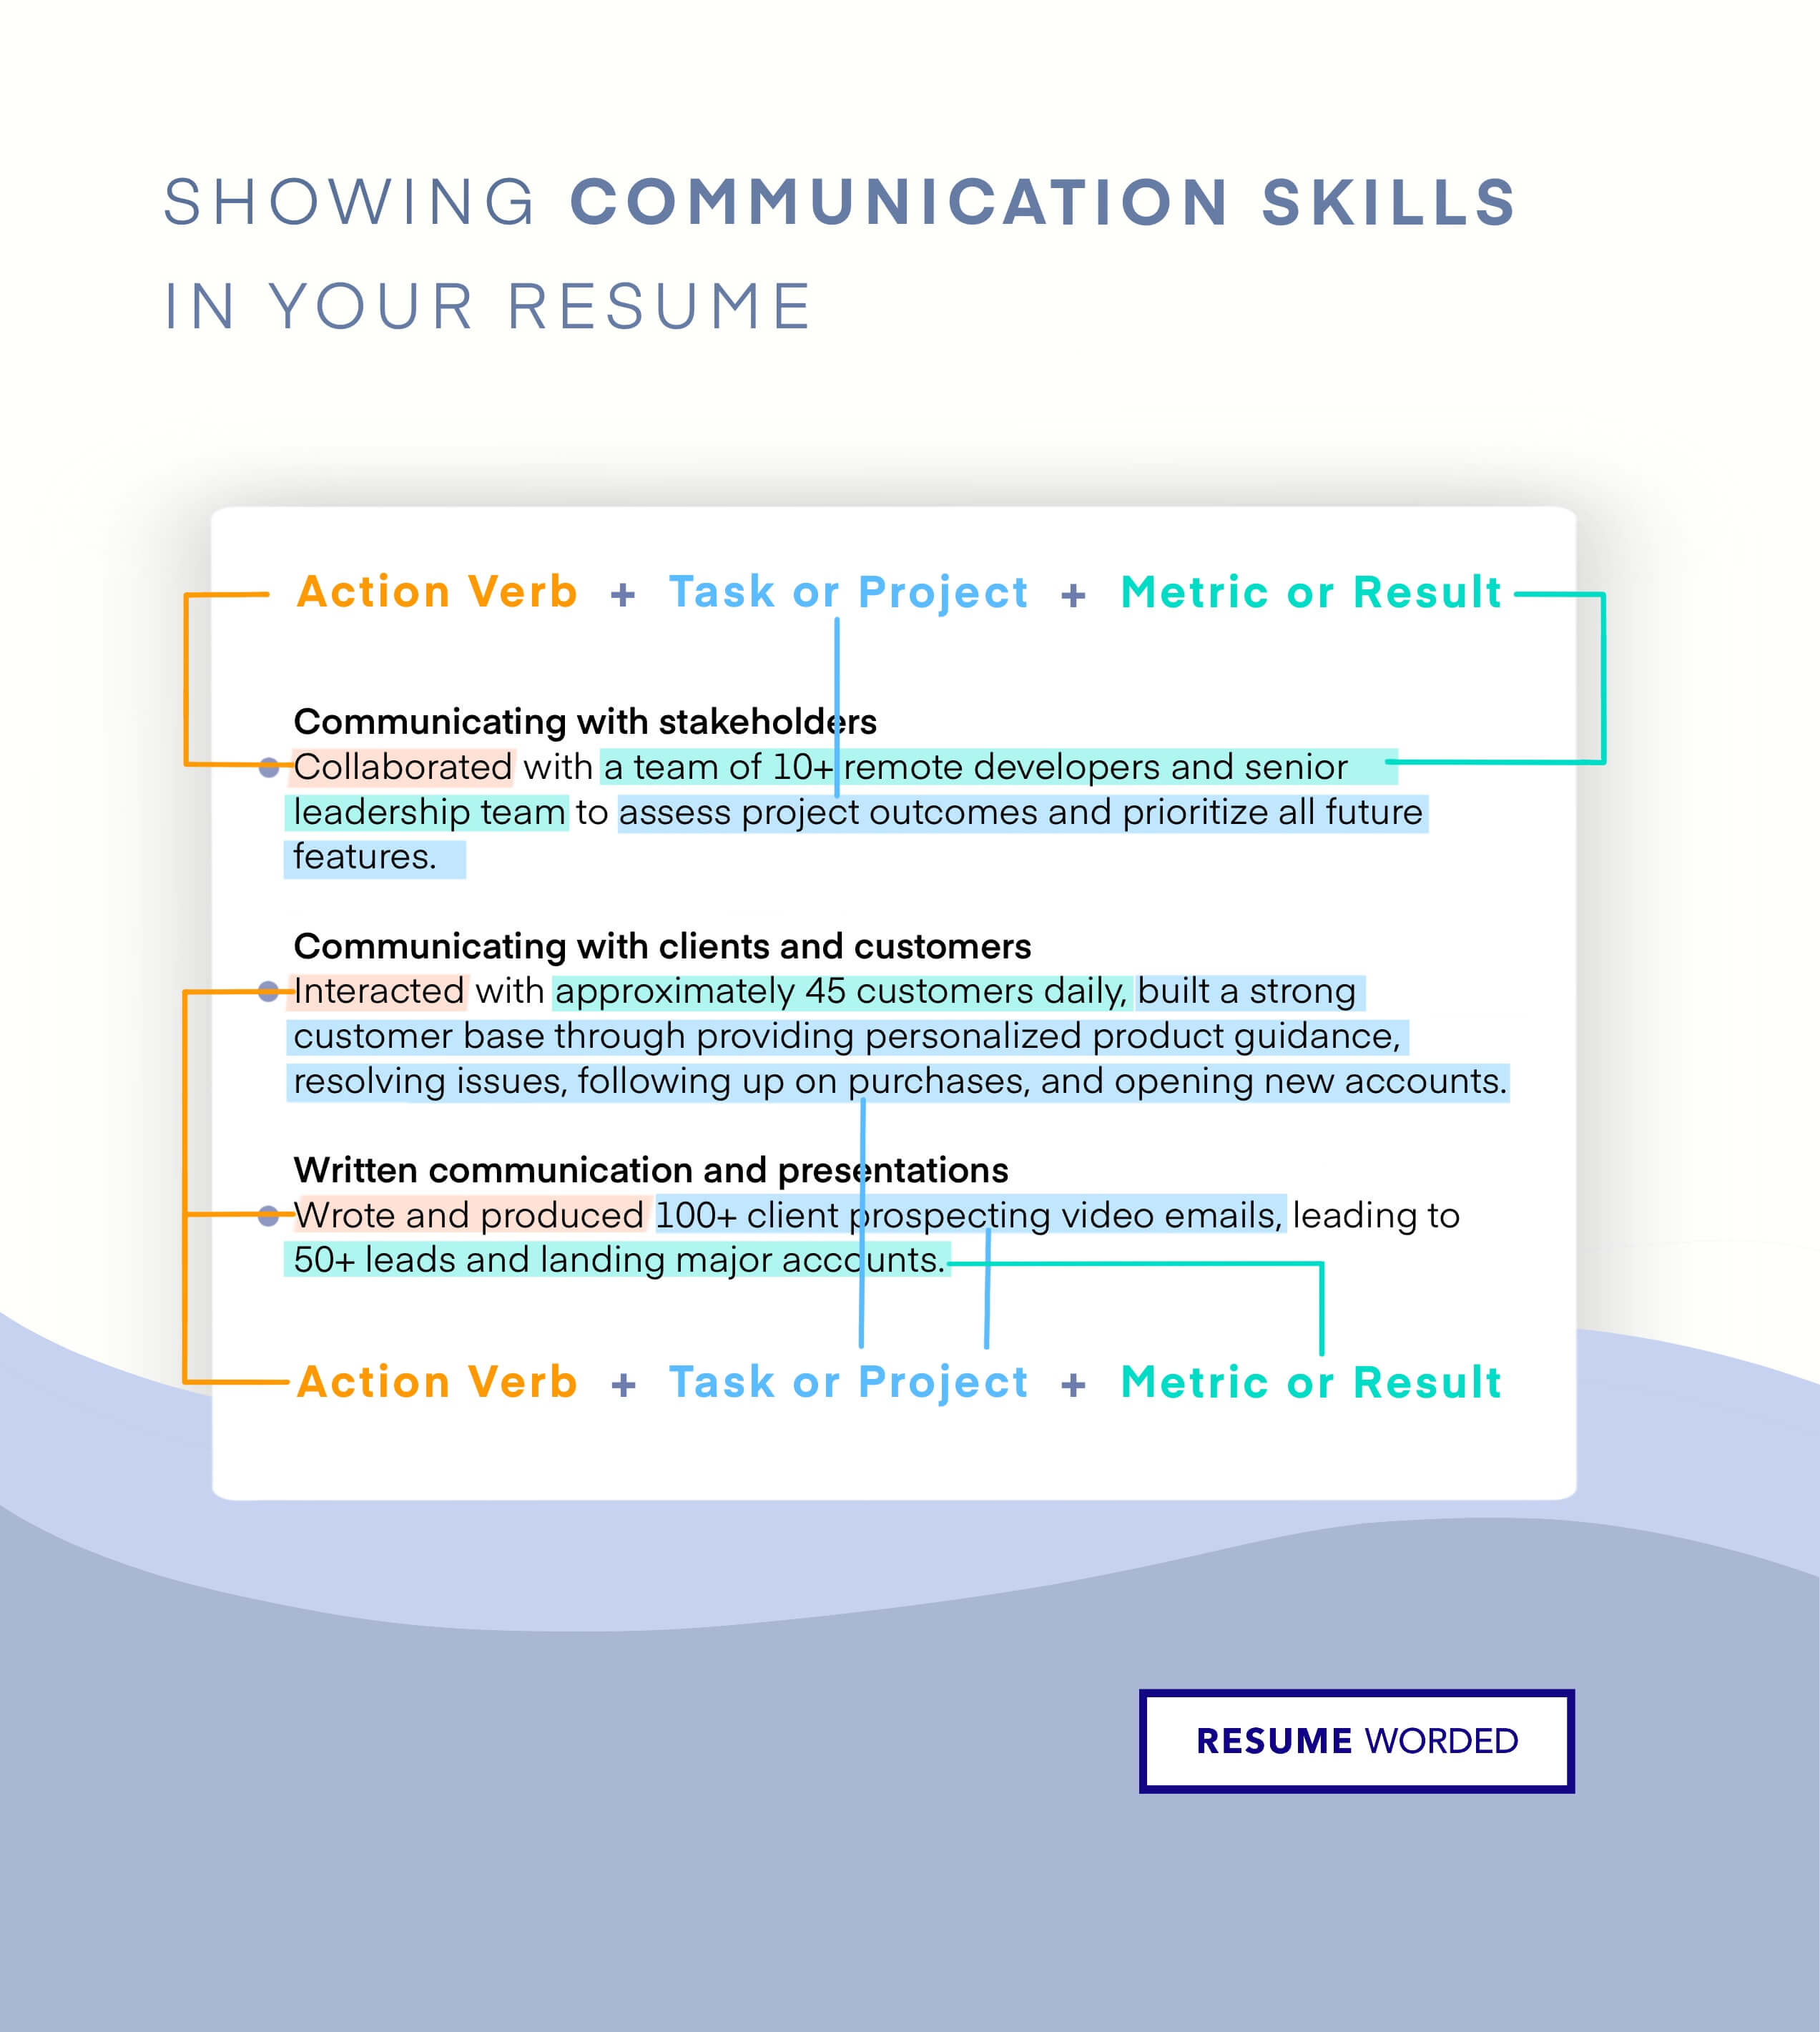 Include concrete examples of communication and leadership skills with impact statements. - Senior Java Developer Resume